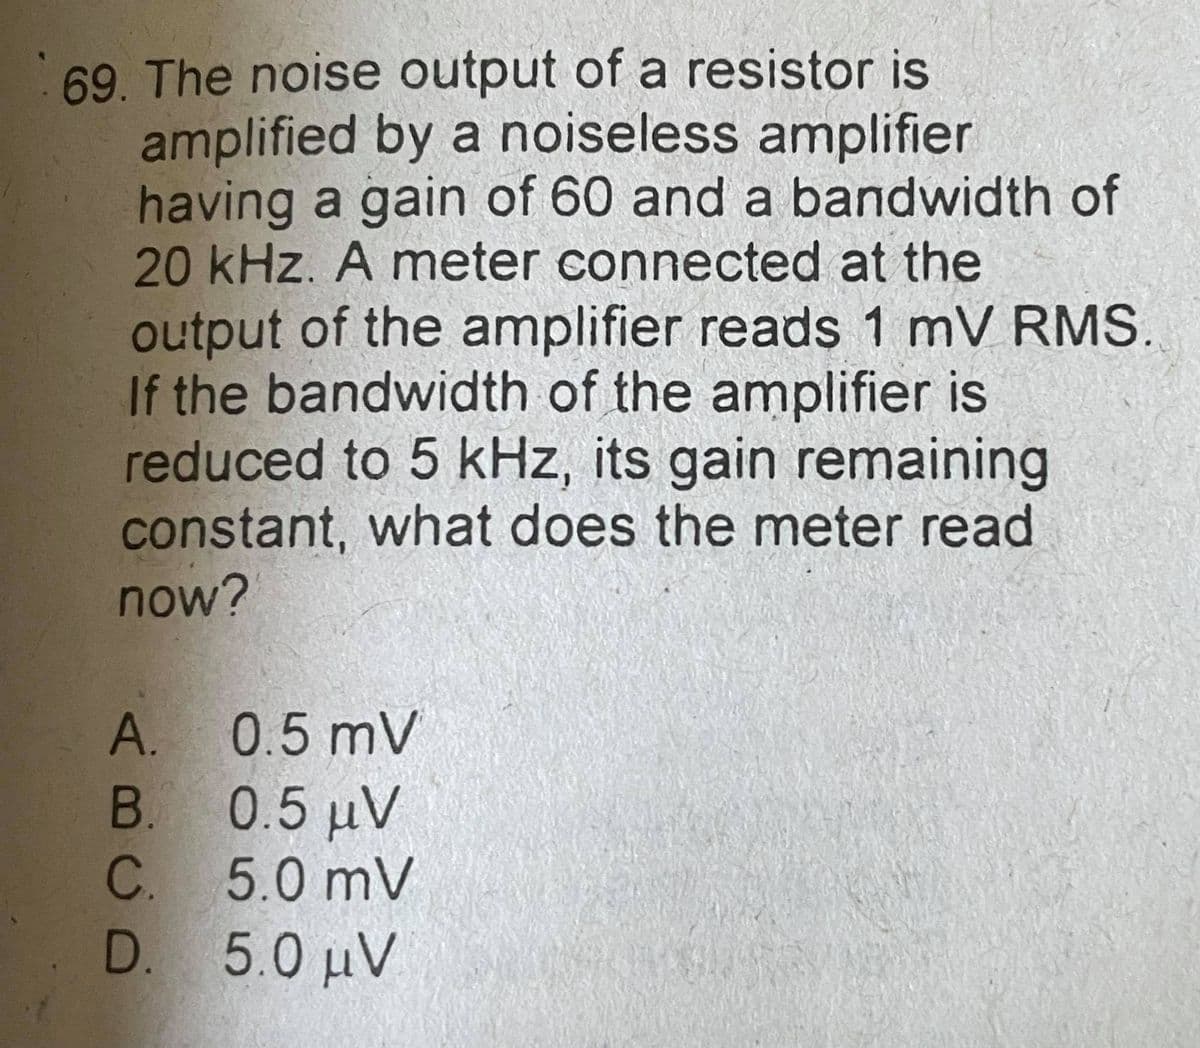 69. The noise output of a resistor is
amplified by a noiseless amplifier
having a gain of 60 and a bandwidth of
20 kHz. A meter connected at the
output of the amplifier reads 1 mV RMS.
If the bandwidth of the amplifier is
reduced to 5 kHz, its gain remaining
constant, what does the meter read
now?
A. 0.5 mV
B. 0.5 uV
C.
5.0 mV
D. 5.0 uV
